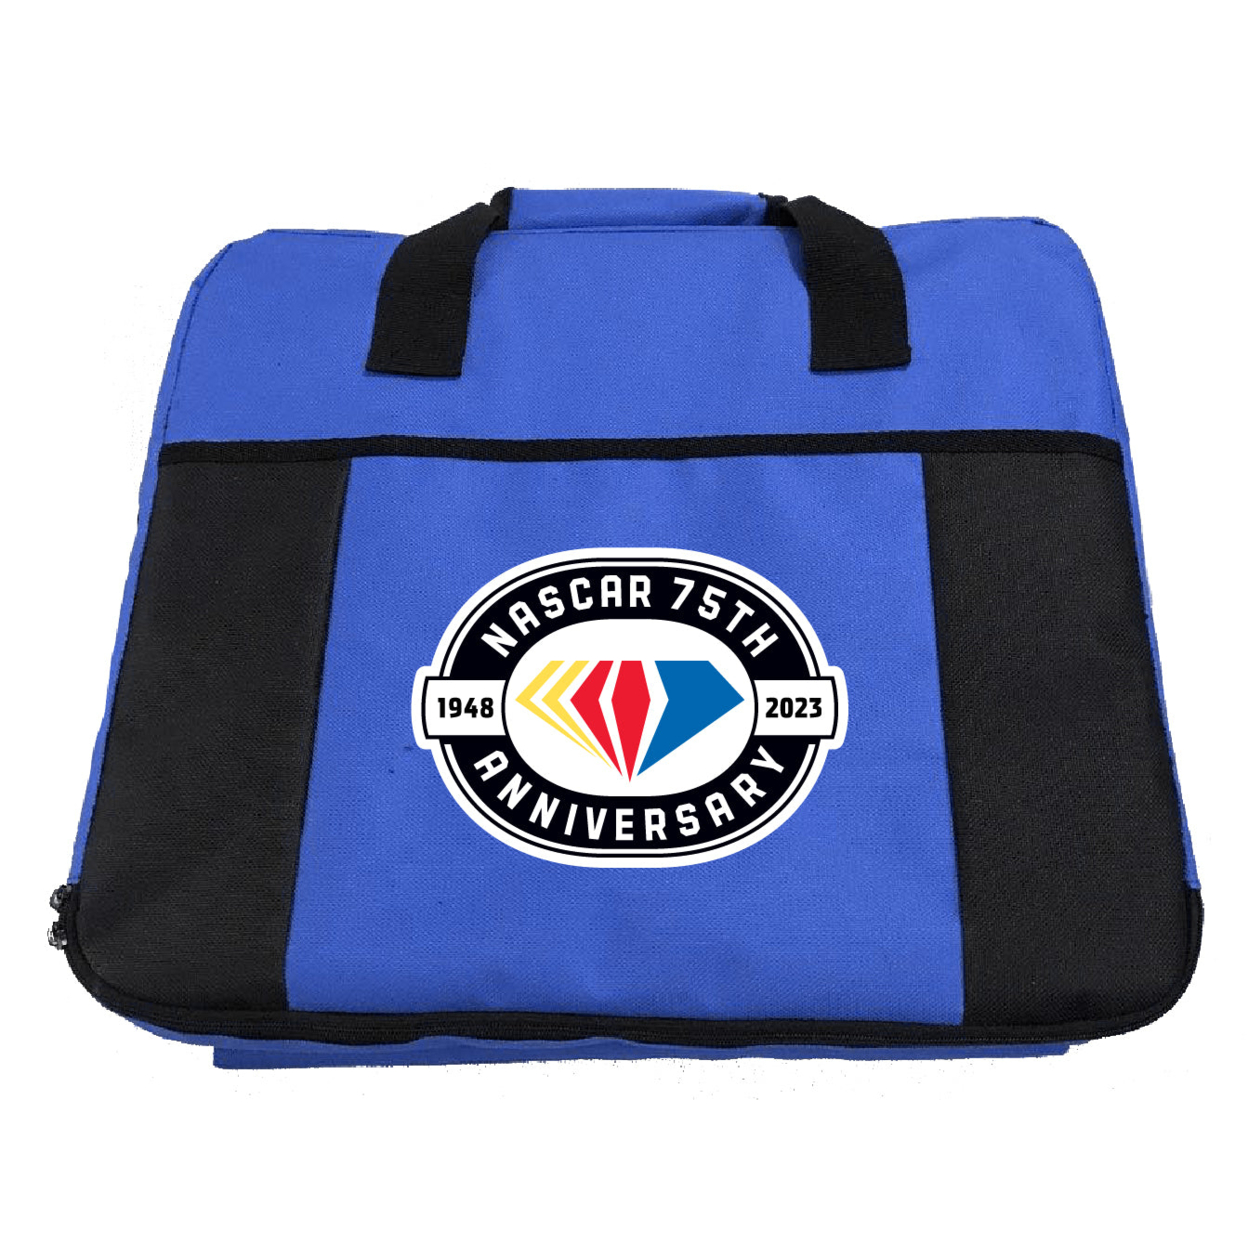 NASCAR 75 Year Anniversary Officially Licensed Deluxe Seat Cushion - Red